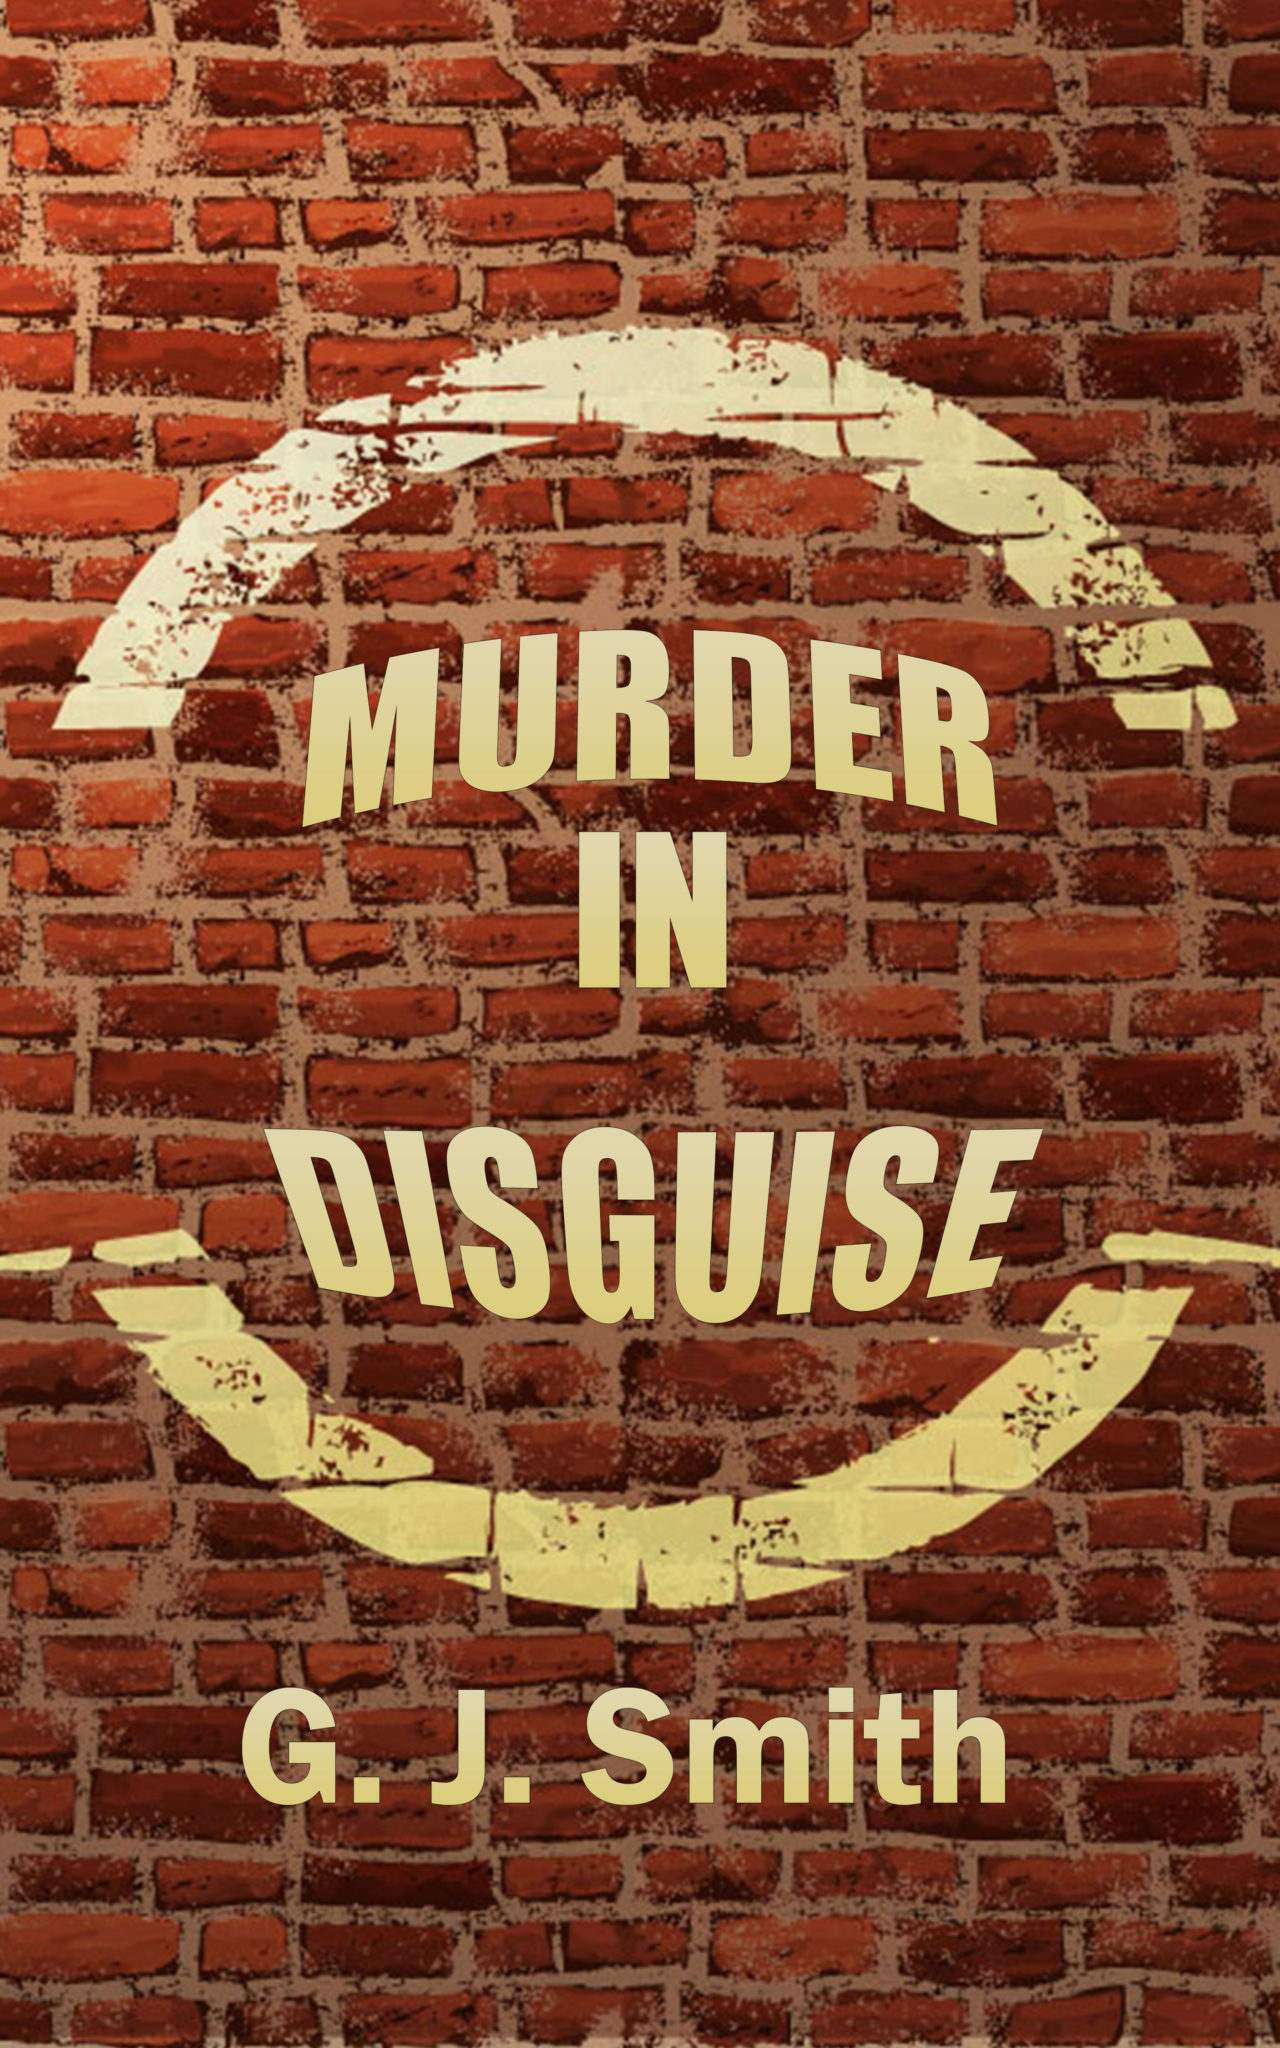 FREE: Murder in Disguise by G.J. Smith